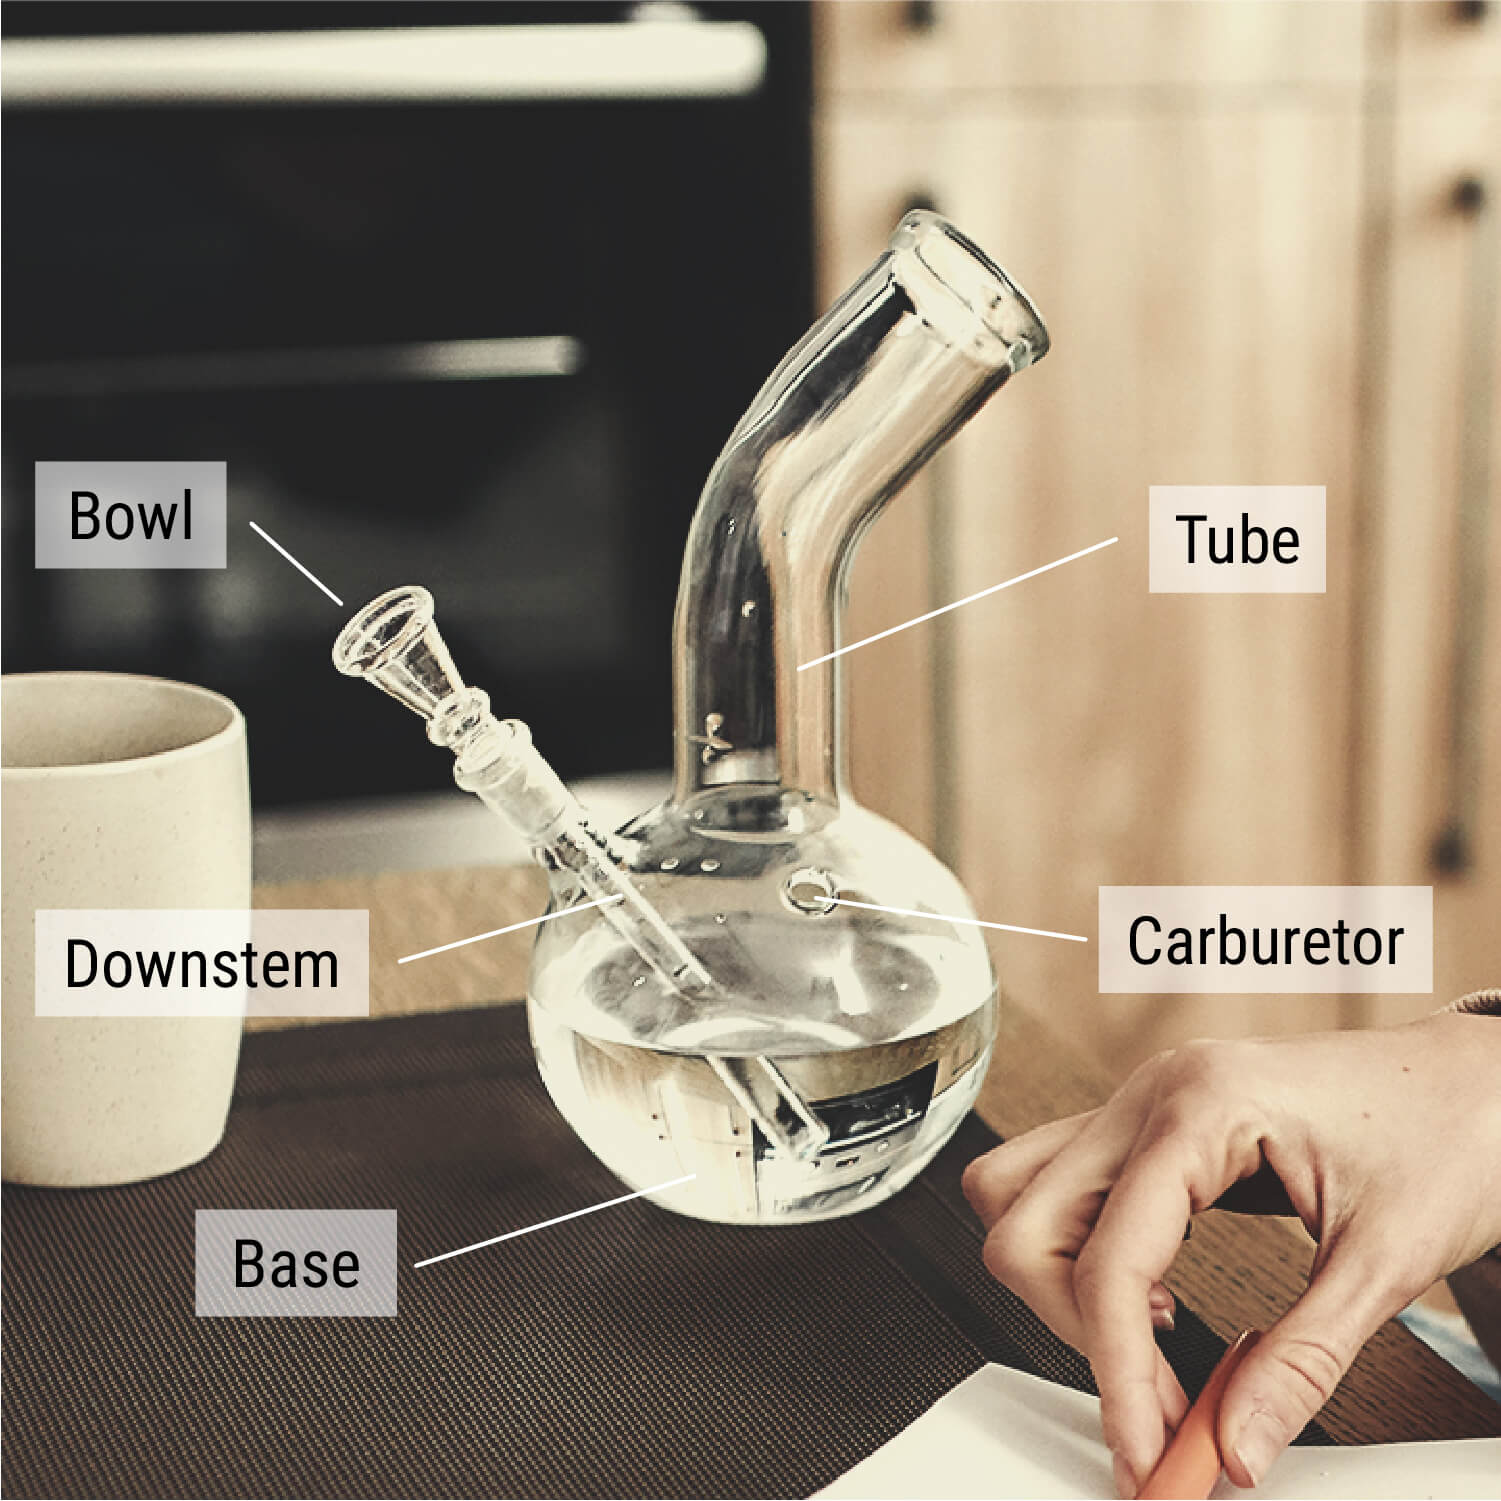 How Does Bong Water Filter Smoke?